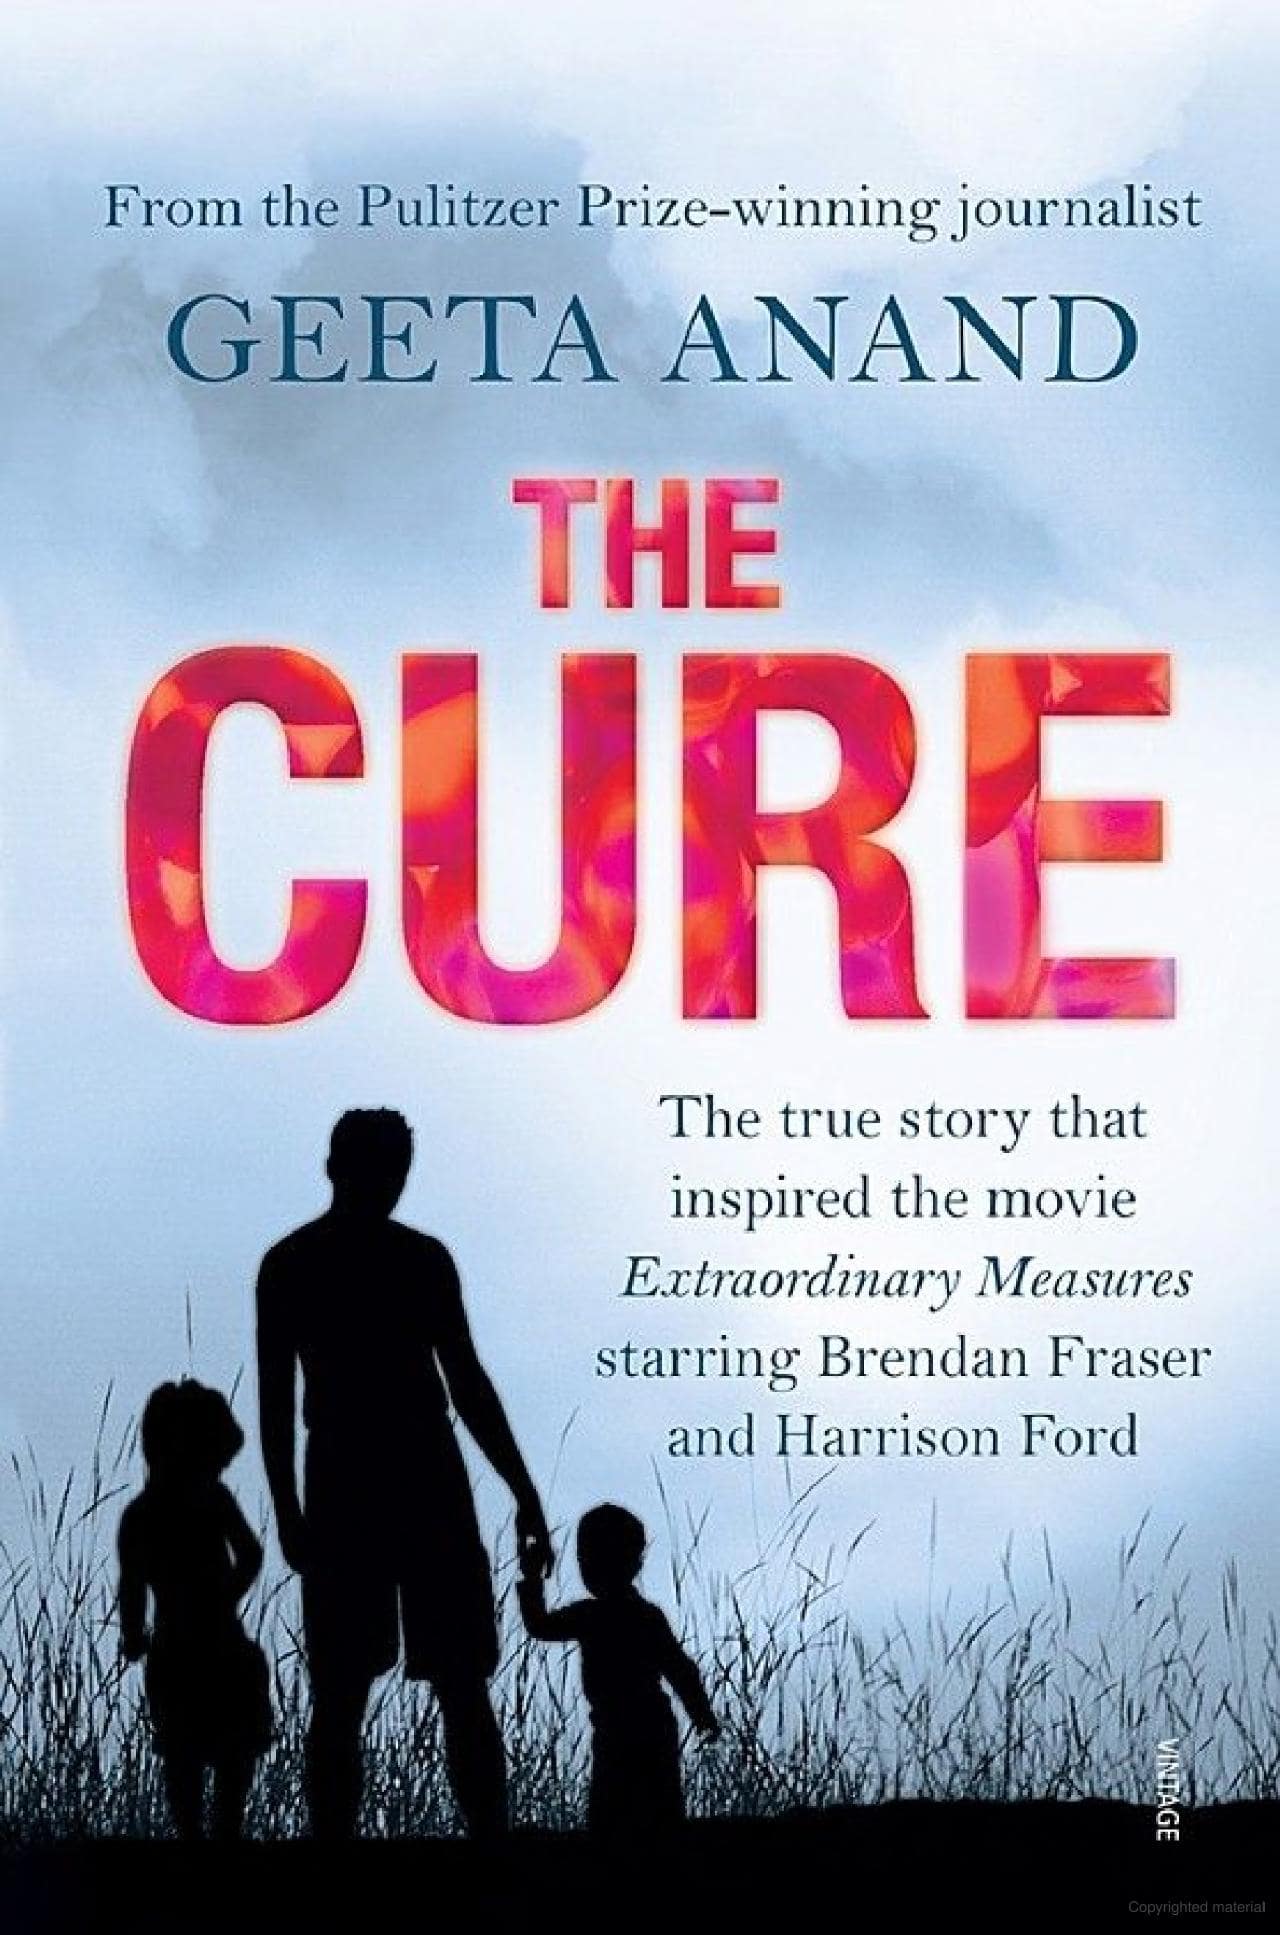 The cure, a book by Geeta Anand